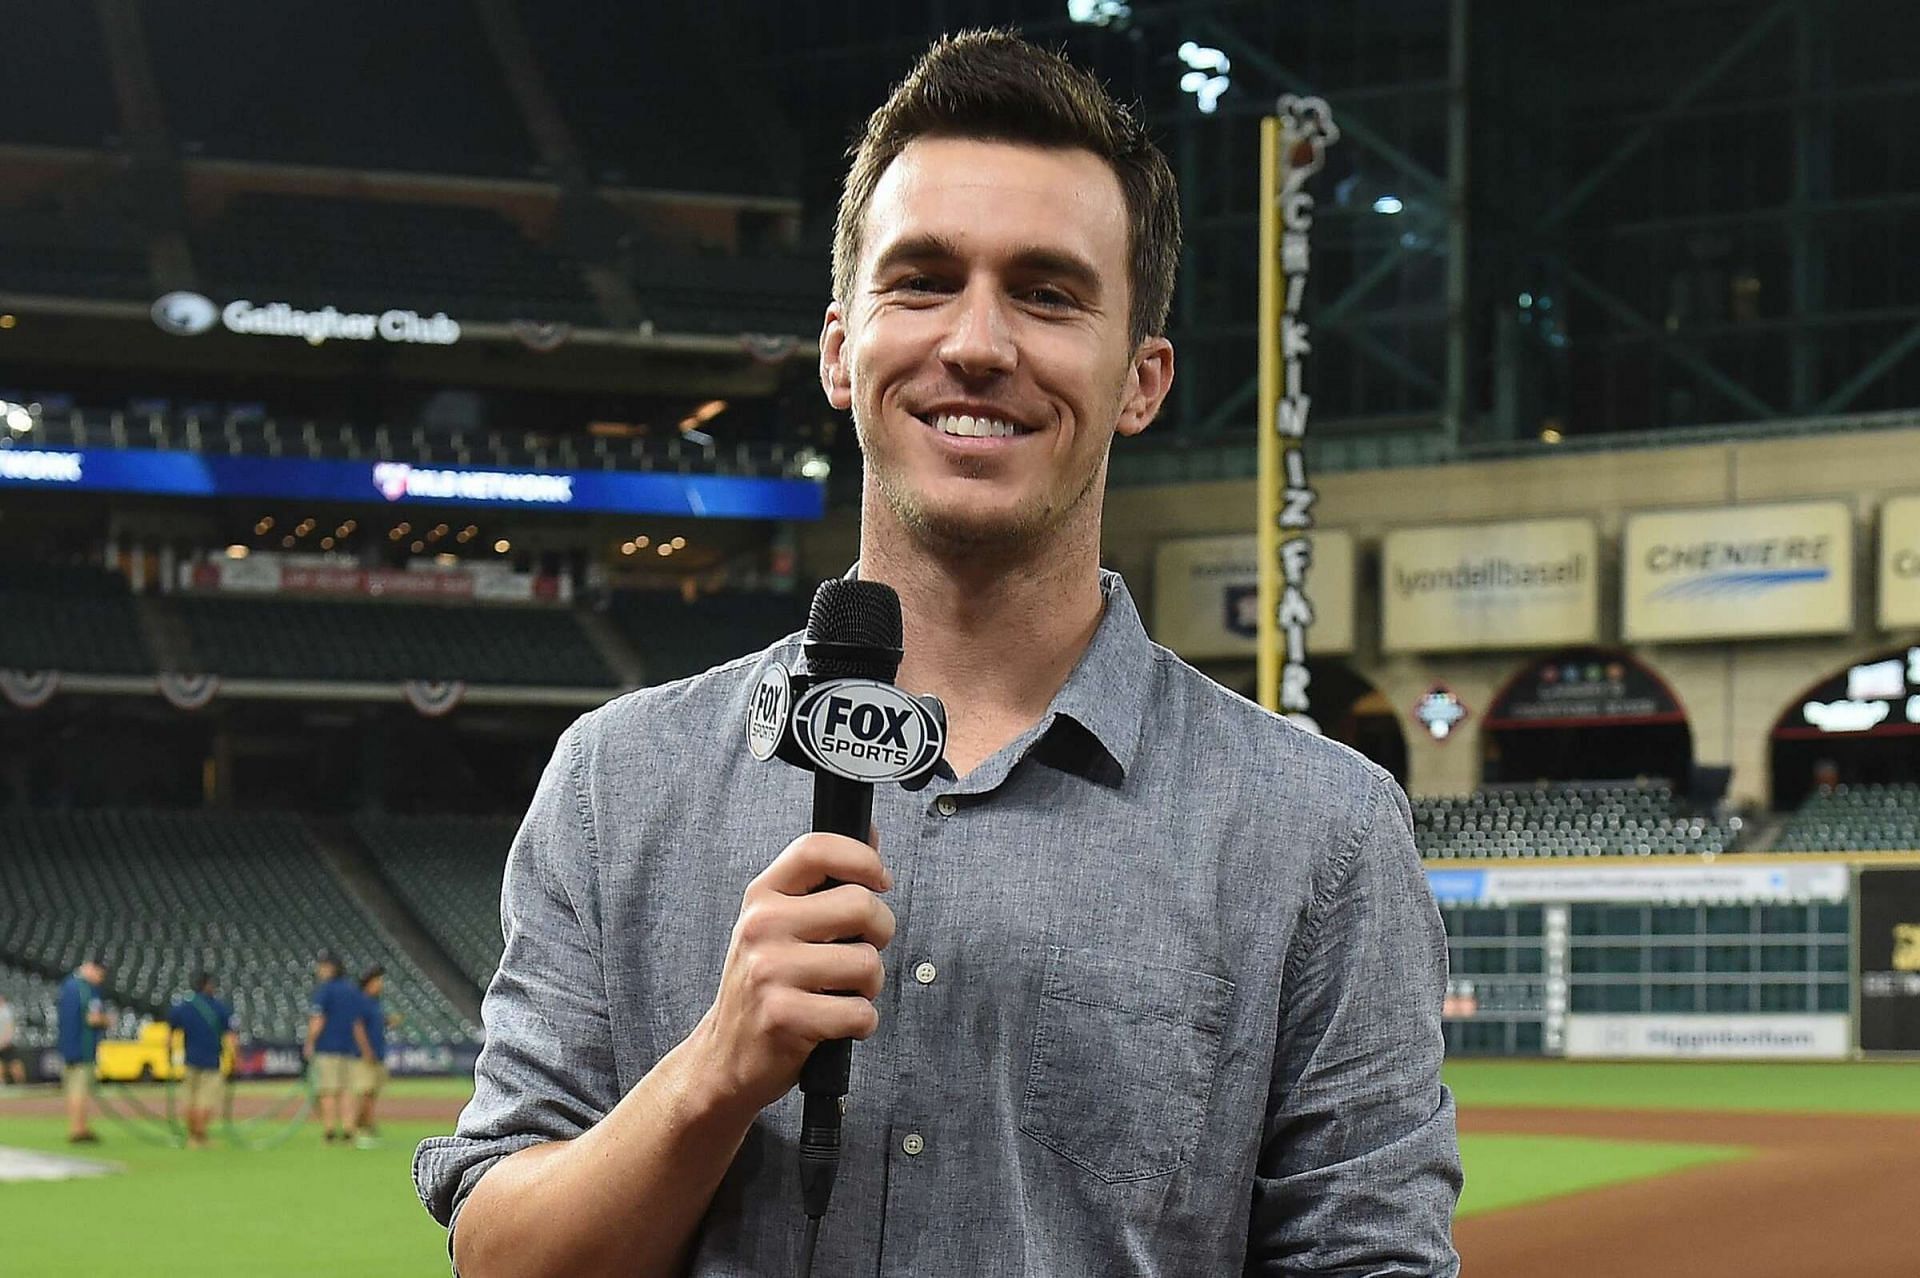 Fox Sports MLB Analyst Ben Verlander is the younger brother of Houston Astros ace Justin Verlander. (Photo from Frank Micelotta/FOX Sports)